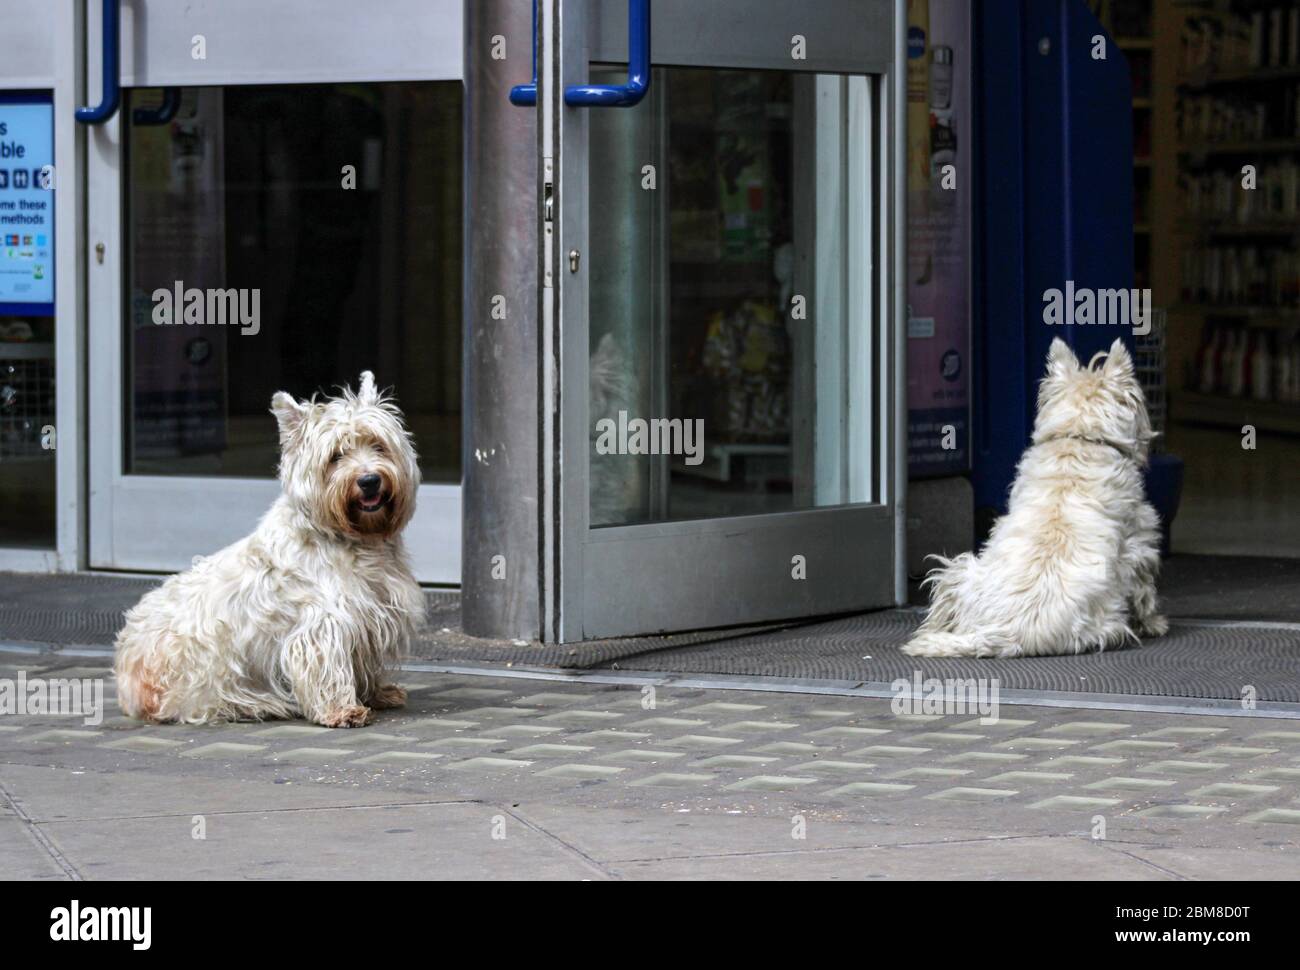 Two unleashed dogs waiting for their master at the shop entry in London, England Stock Photo